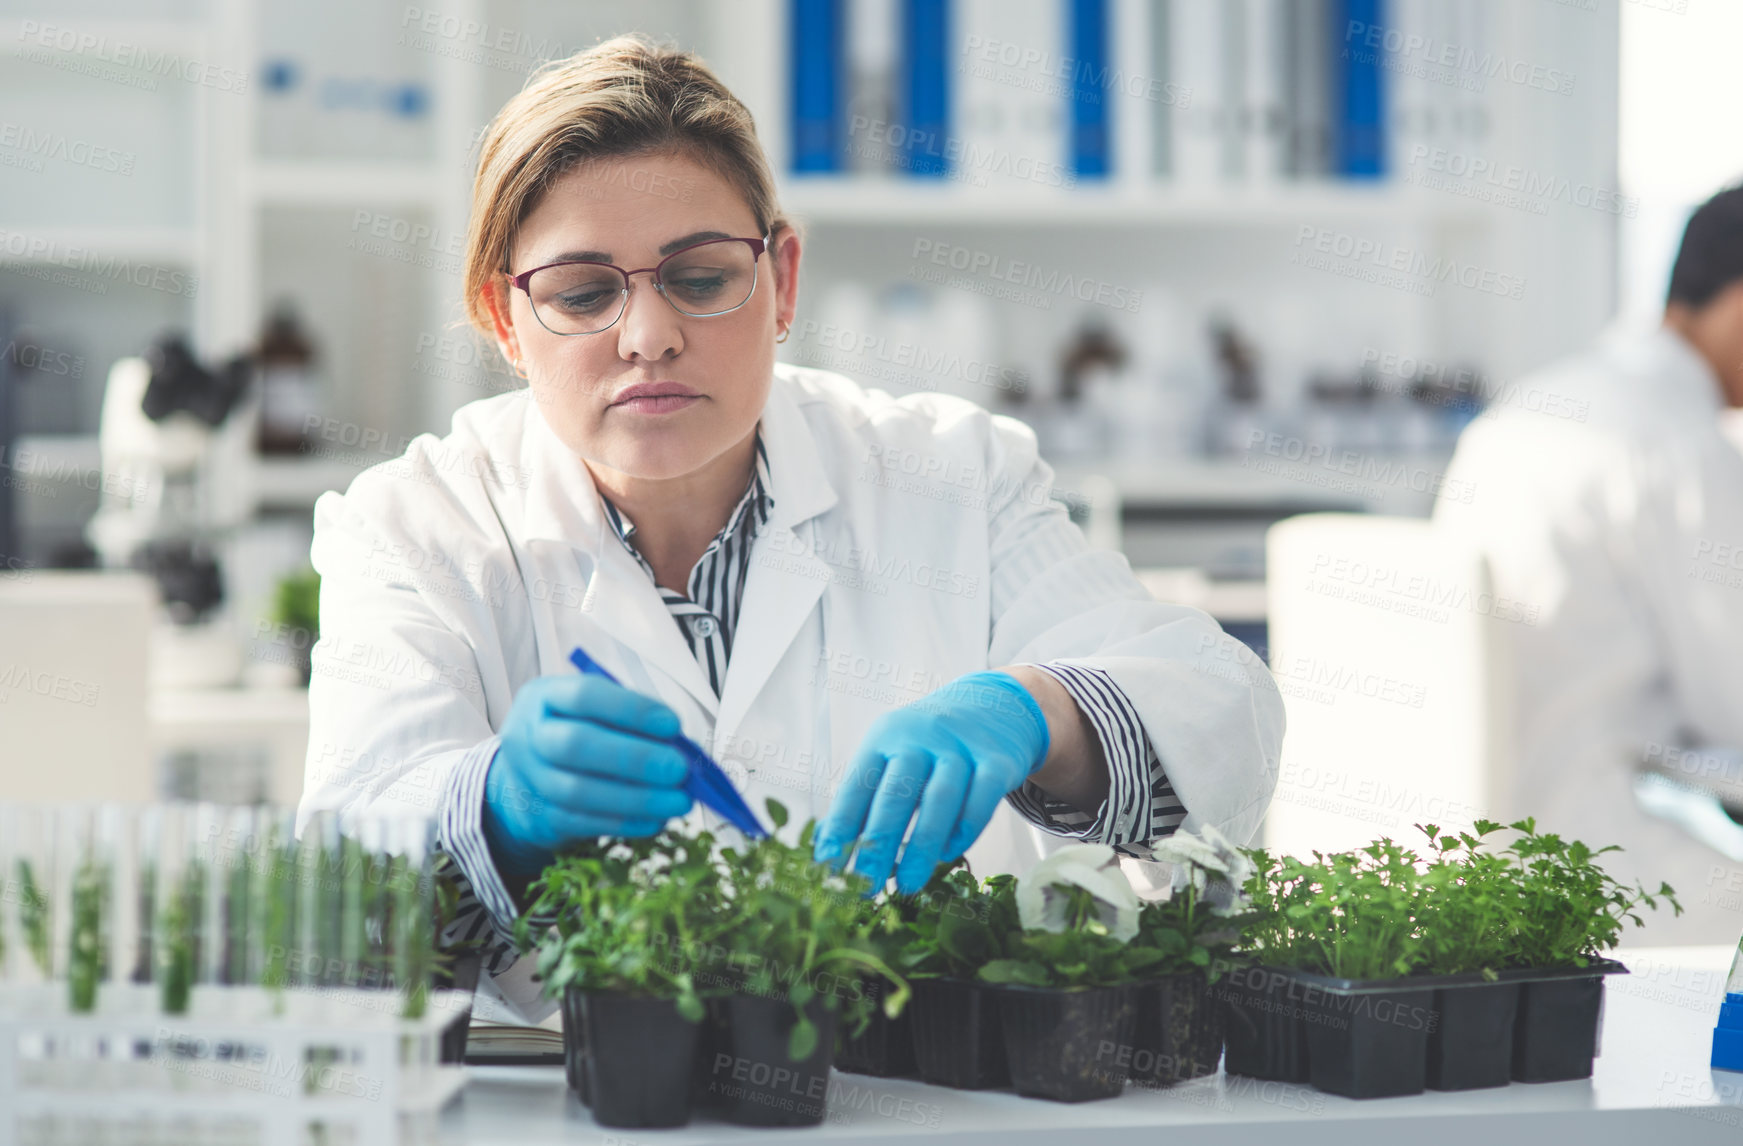 Buy stock photo Cropped shot of an attractive young female scientist picking plant samples using a tweezer in a laboratory with her colleague in the background